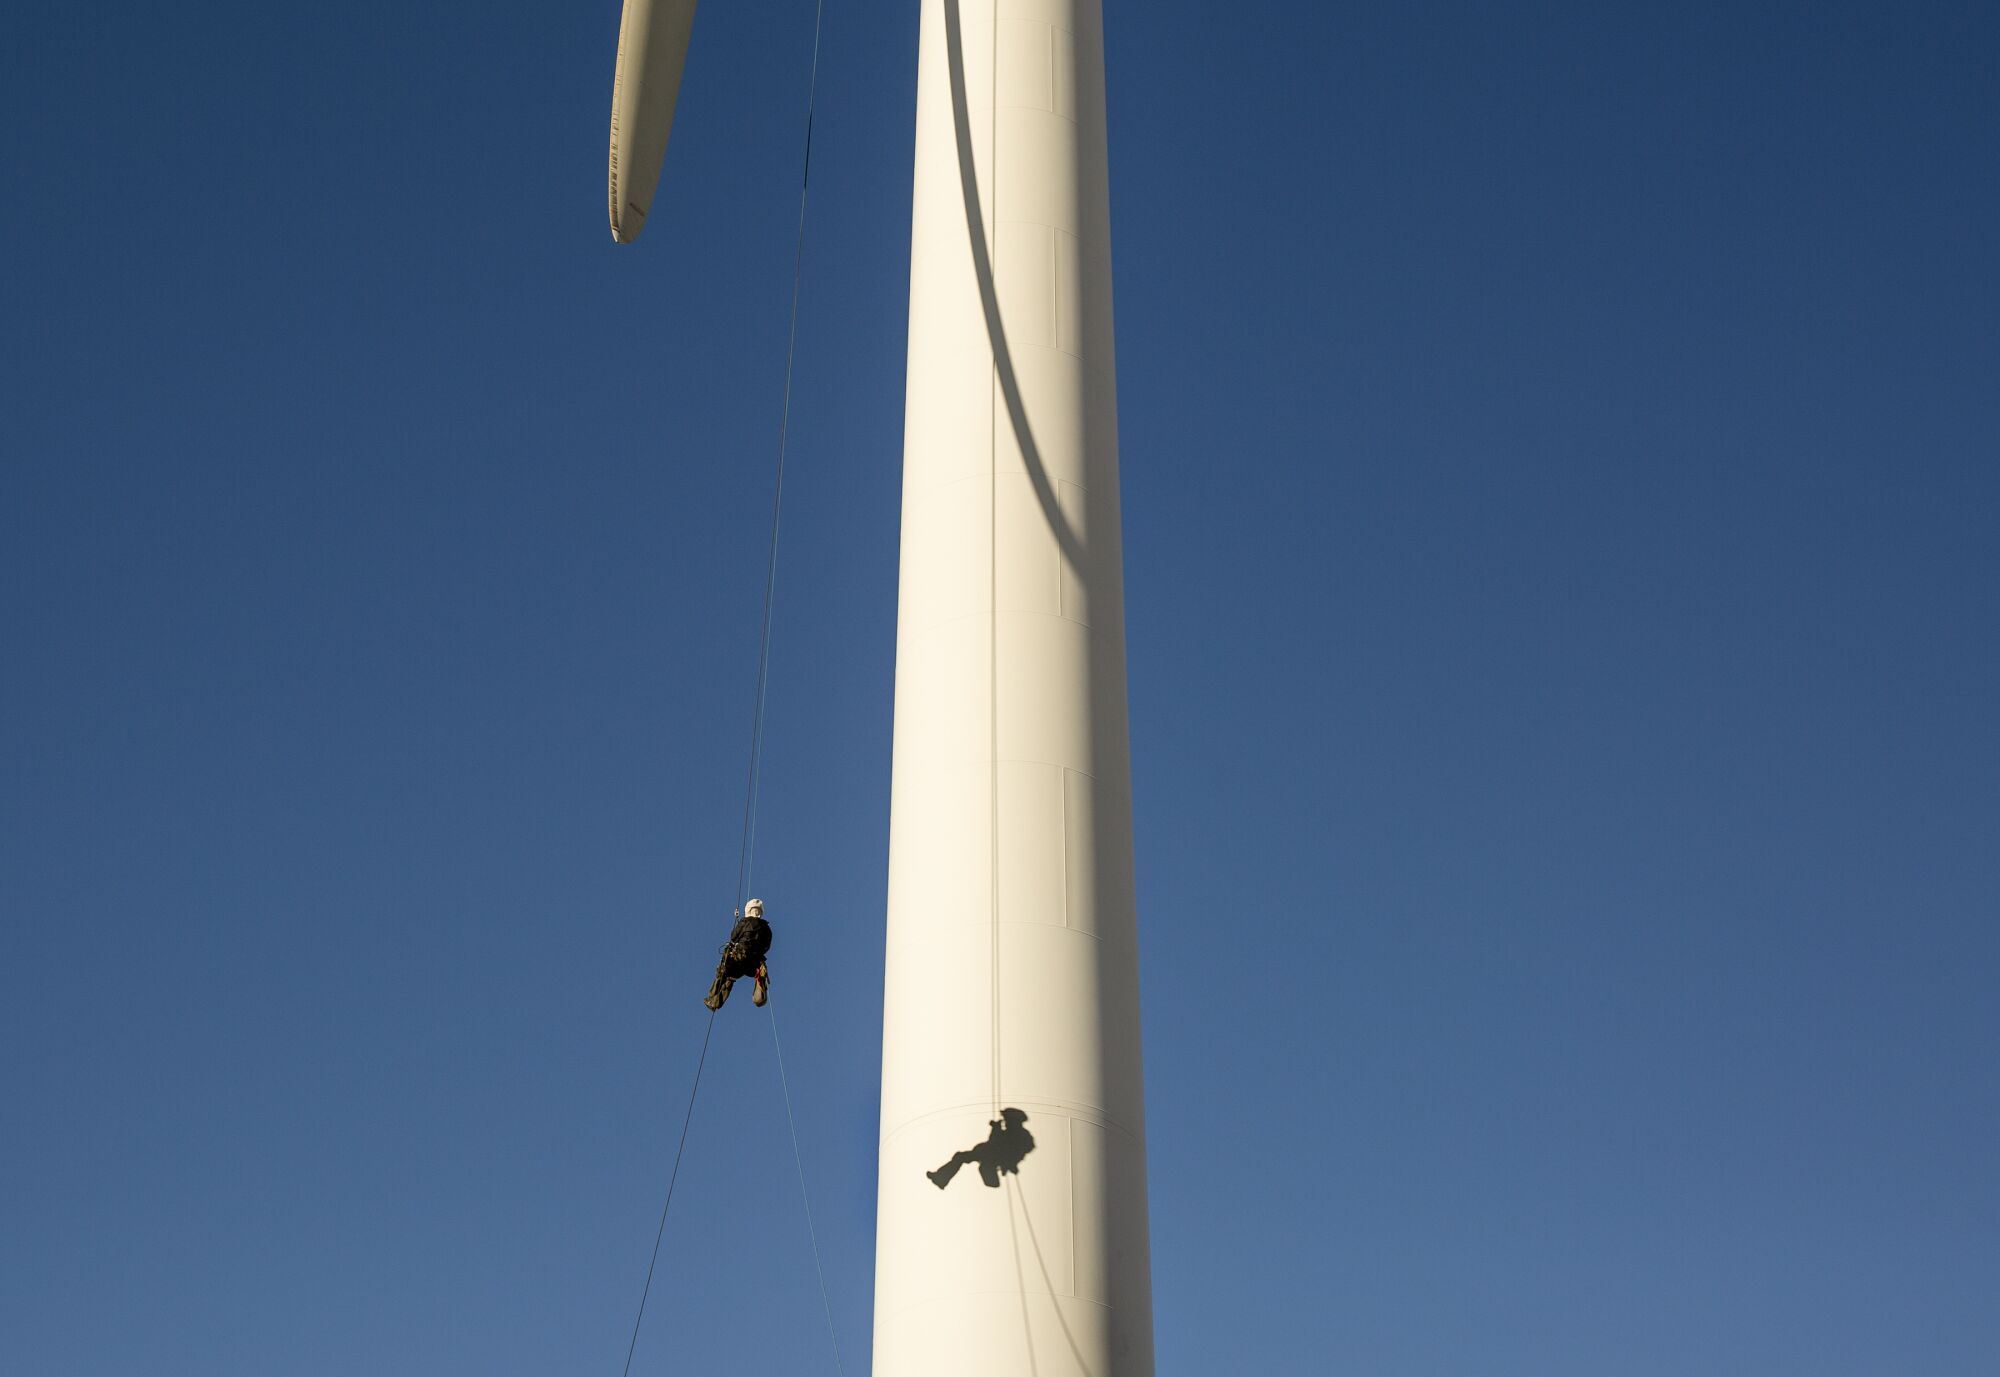 A person hangs from a wind turbine.